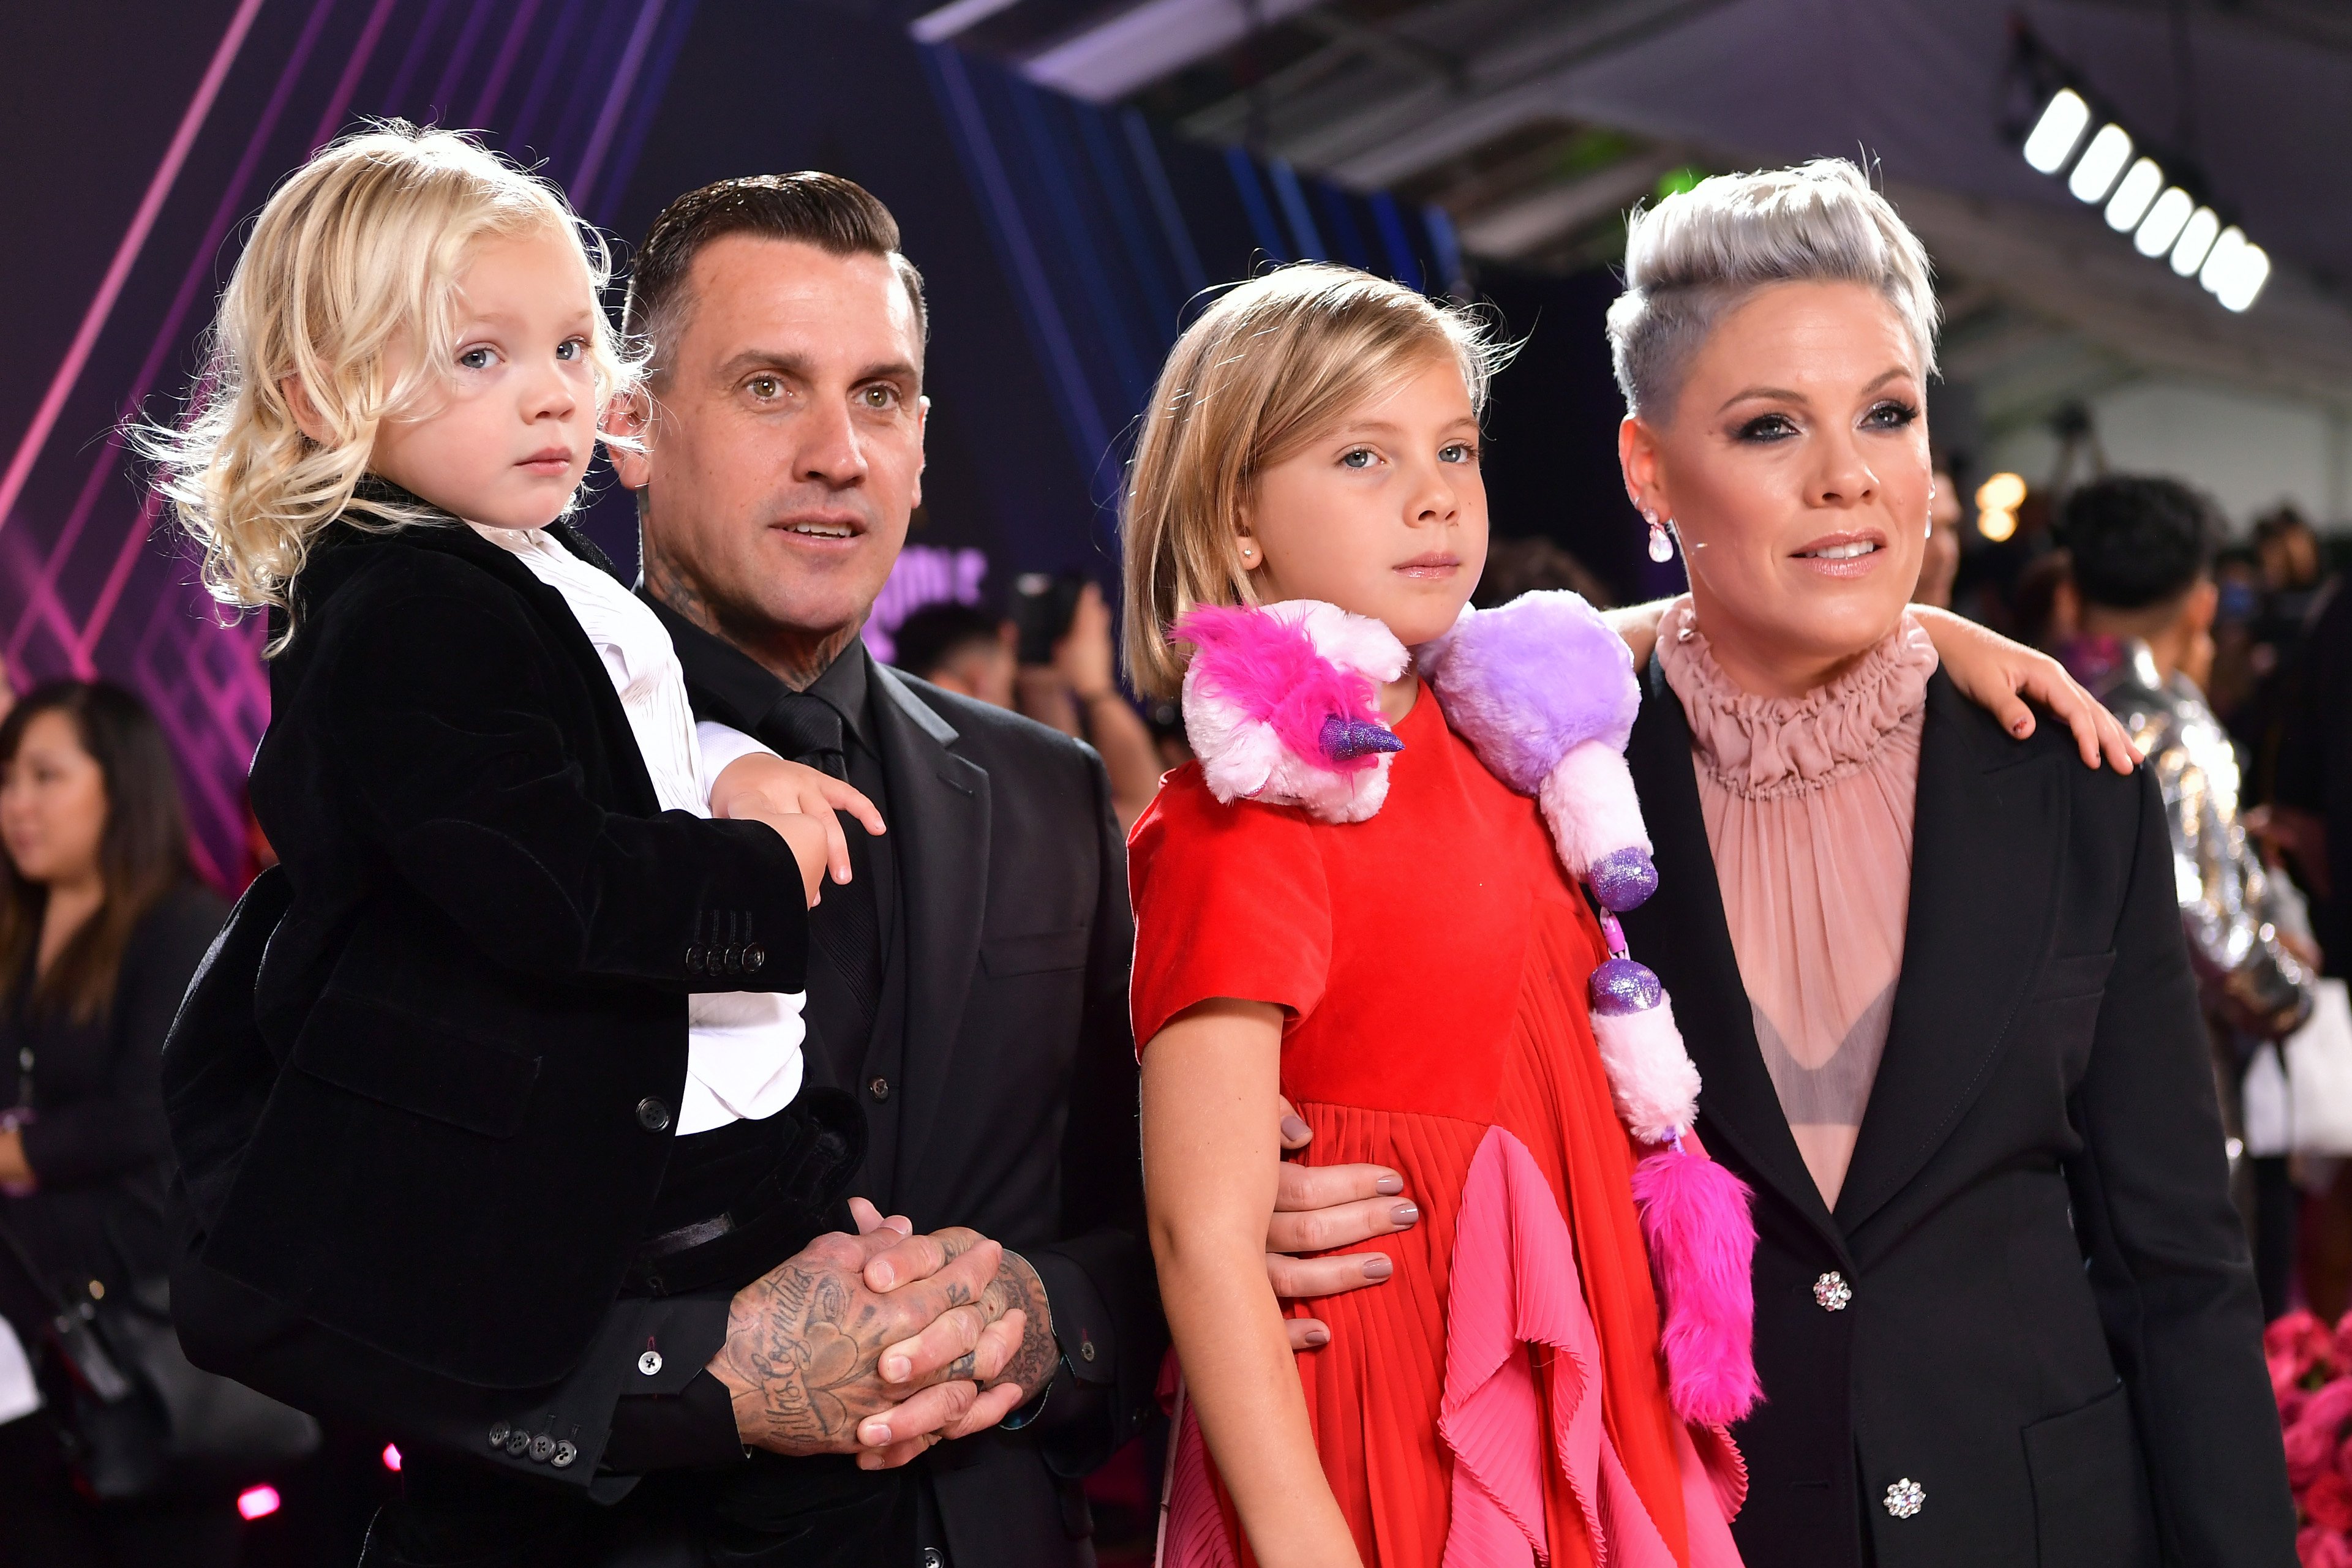 Carey Hart with wife Pink and their two kids Willow and Jameson attend the People's Choice Awards in Santa Monica, California on November 10, 2019 | Photo: Getty Images